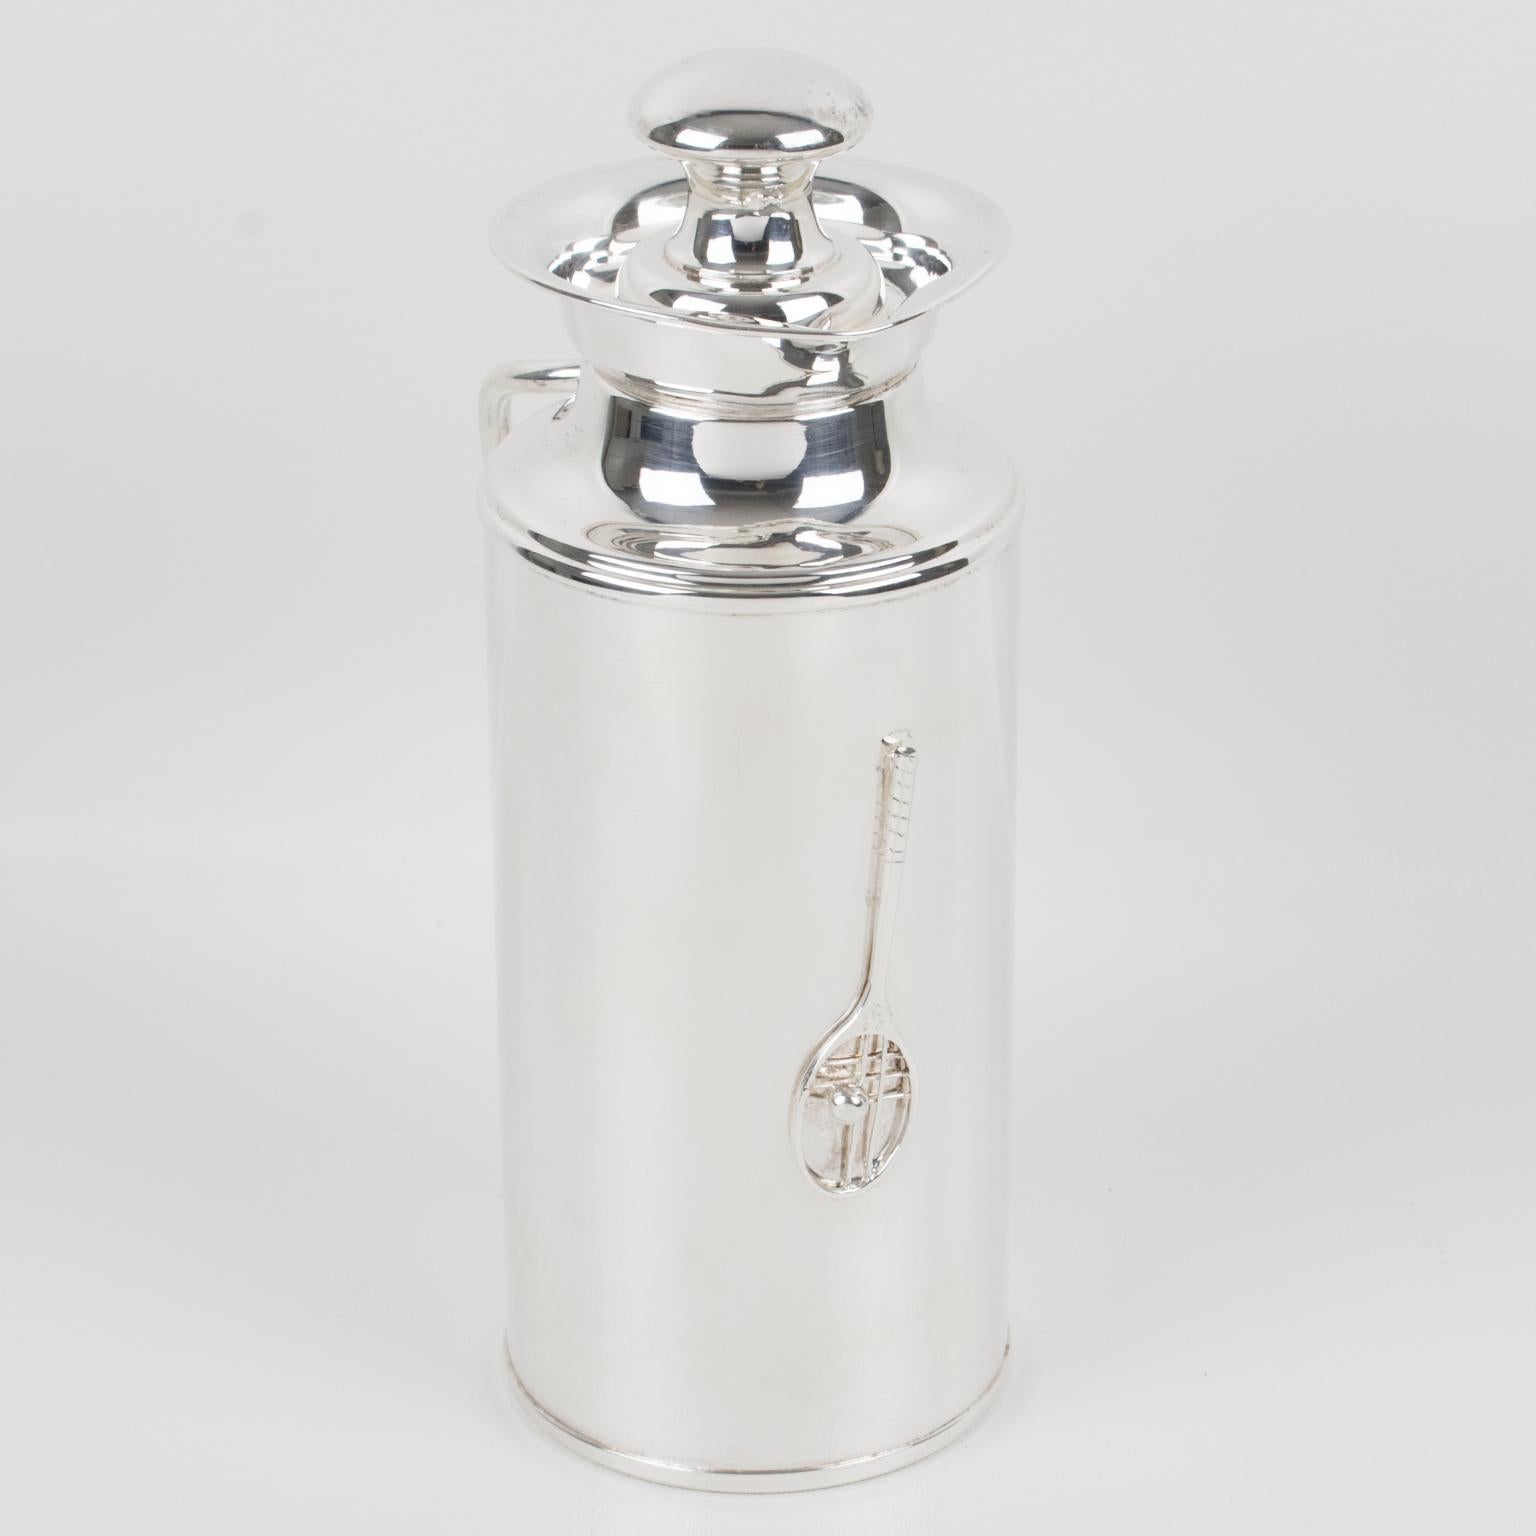 Modern Silver Plate Thermos Insulated Decanter with Tennis Motif, Italy 1980s For Sale